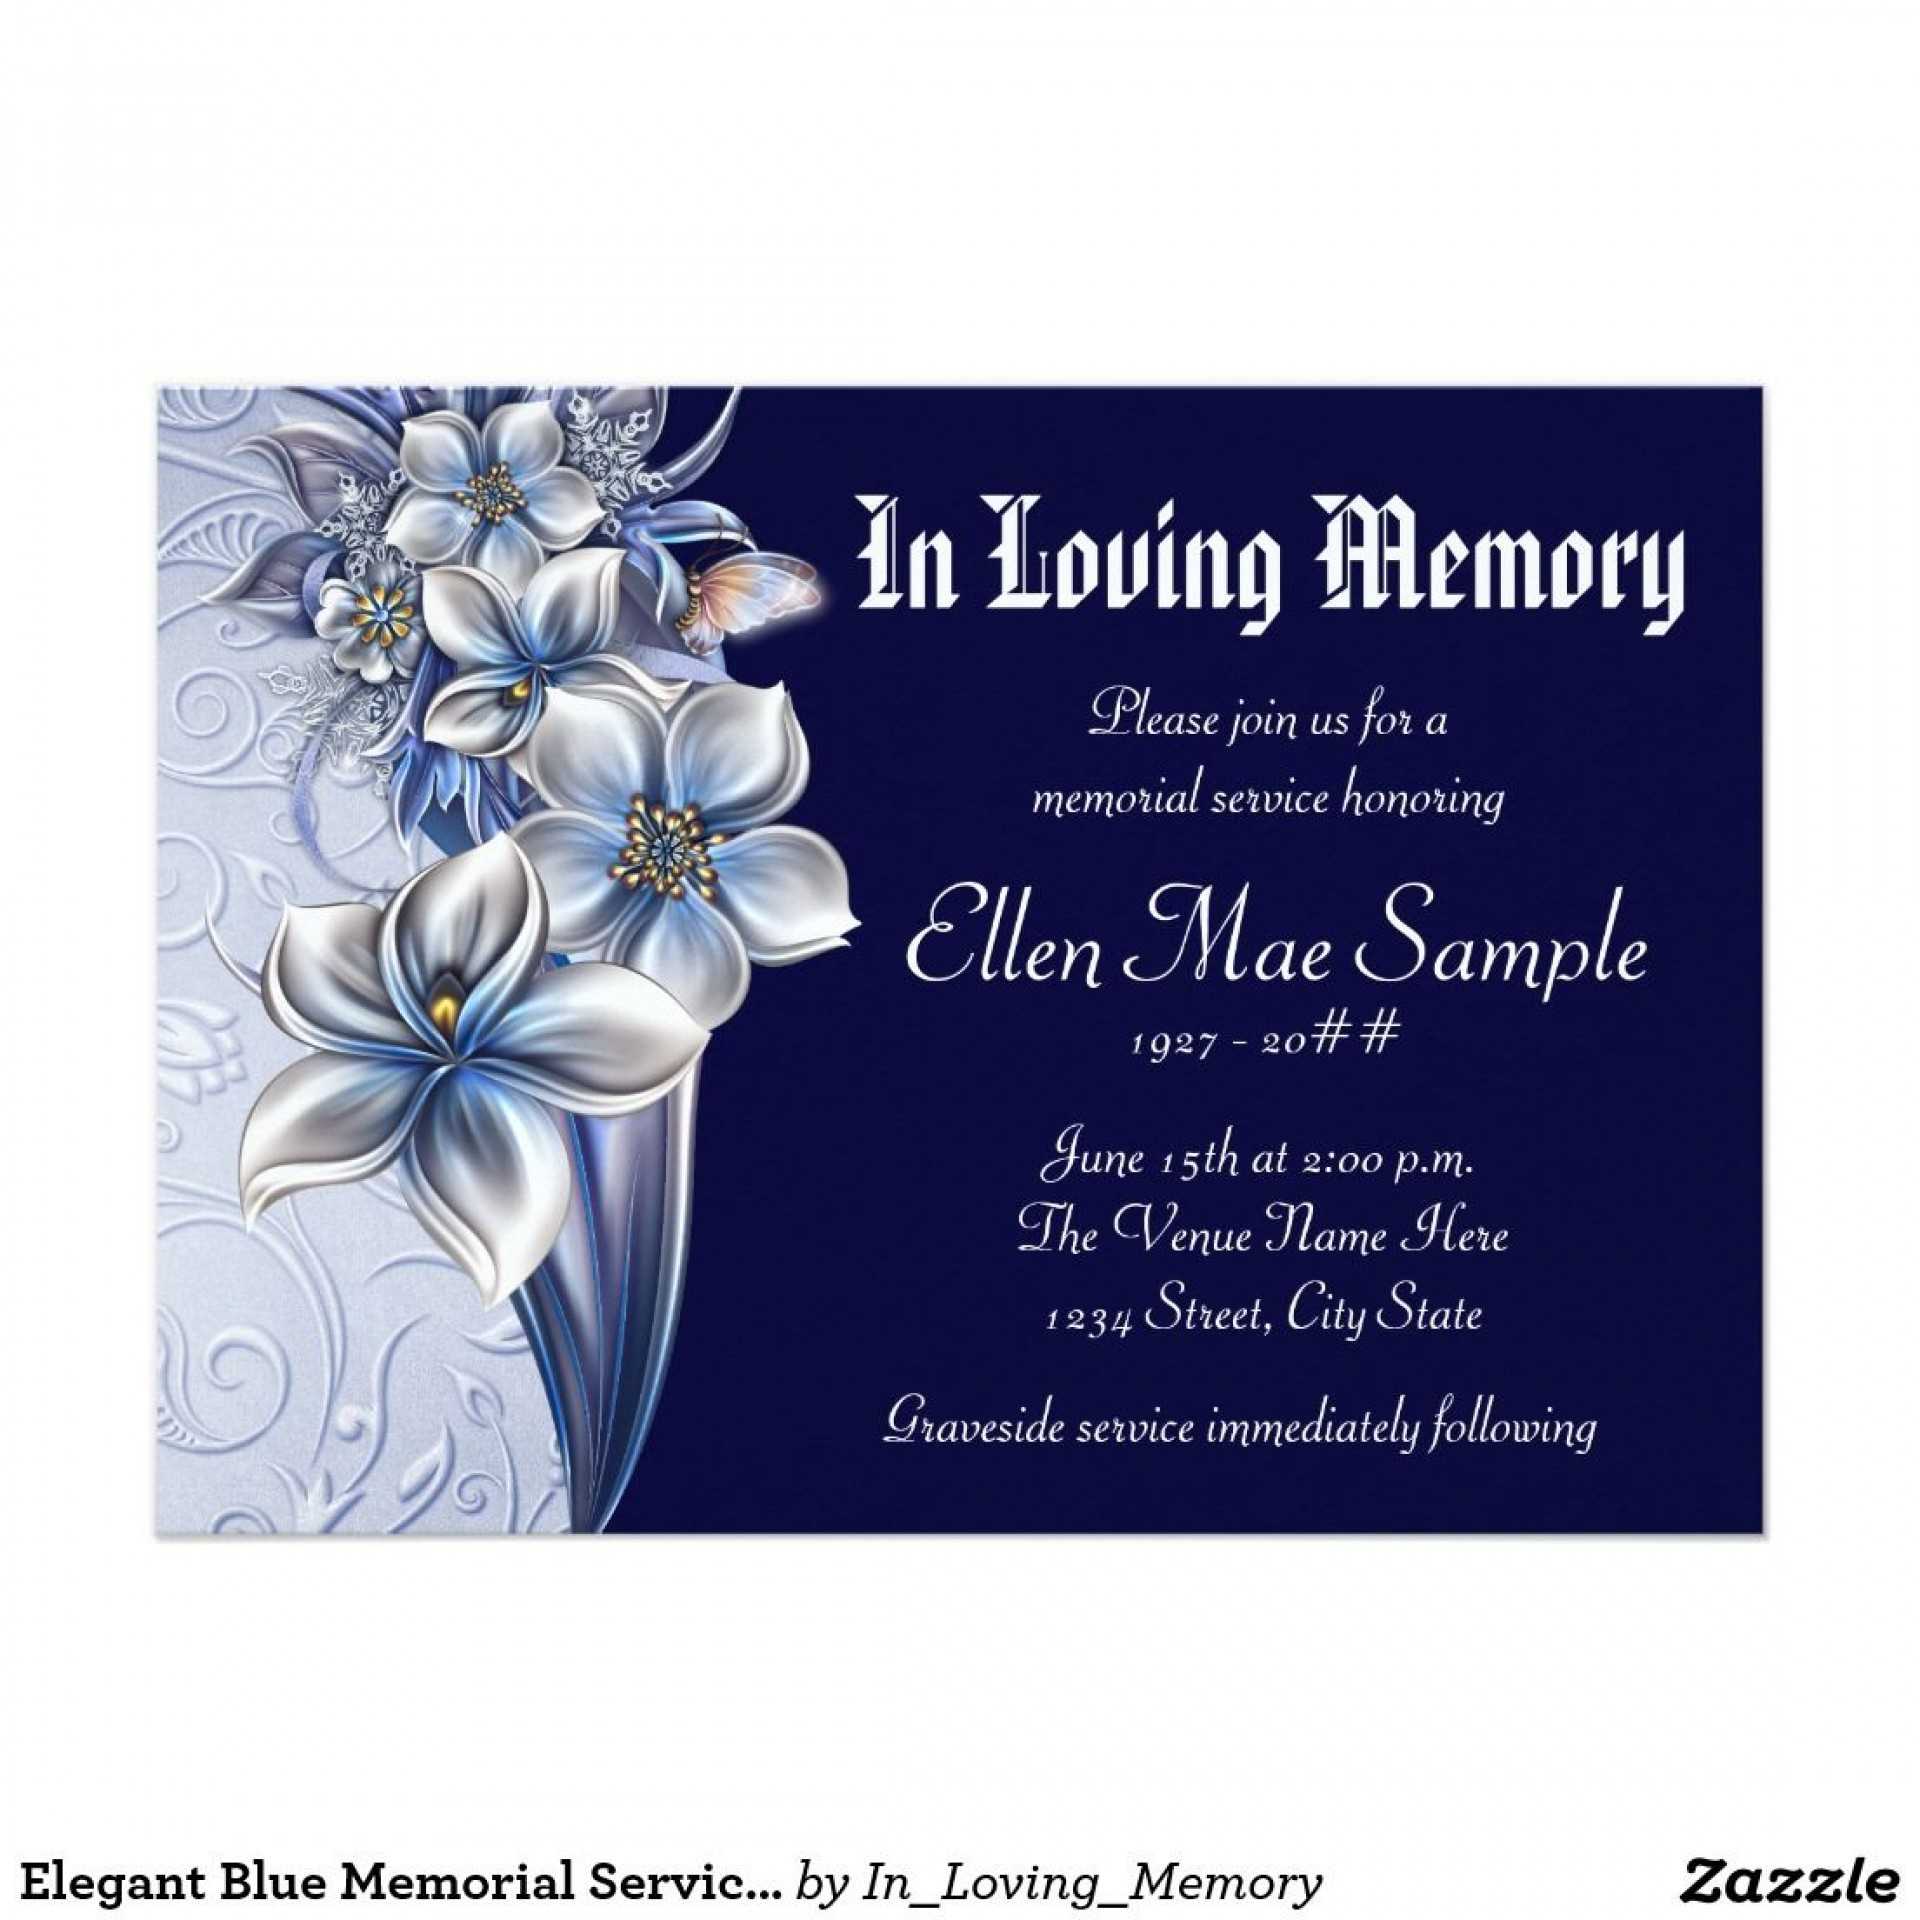 008 Funeral Invitation Template Free Incredible Ideas Word With Regard To Funeral Invitation Card Template